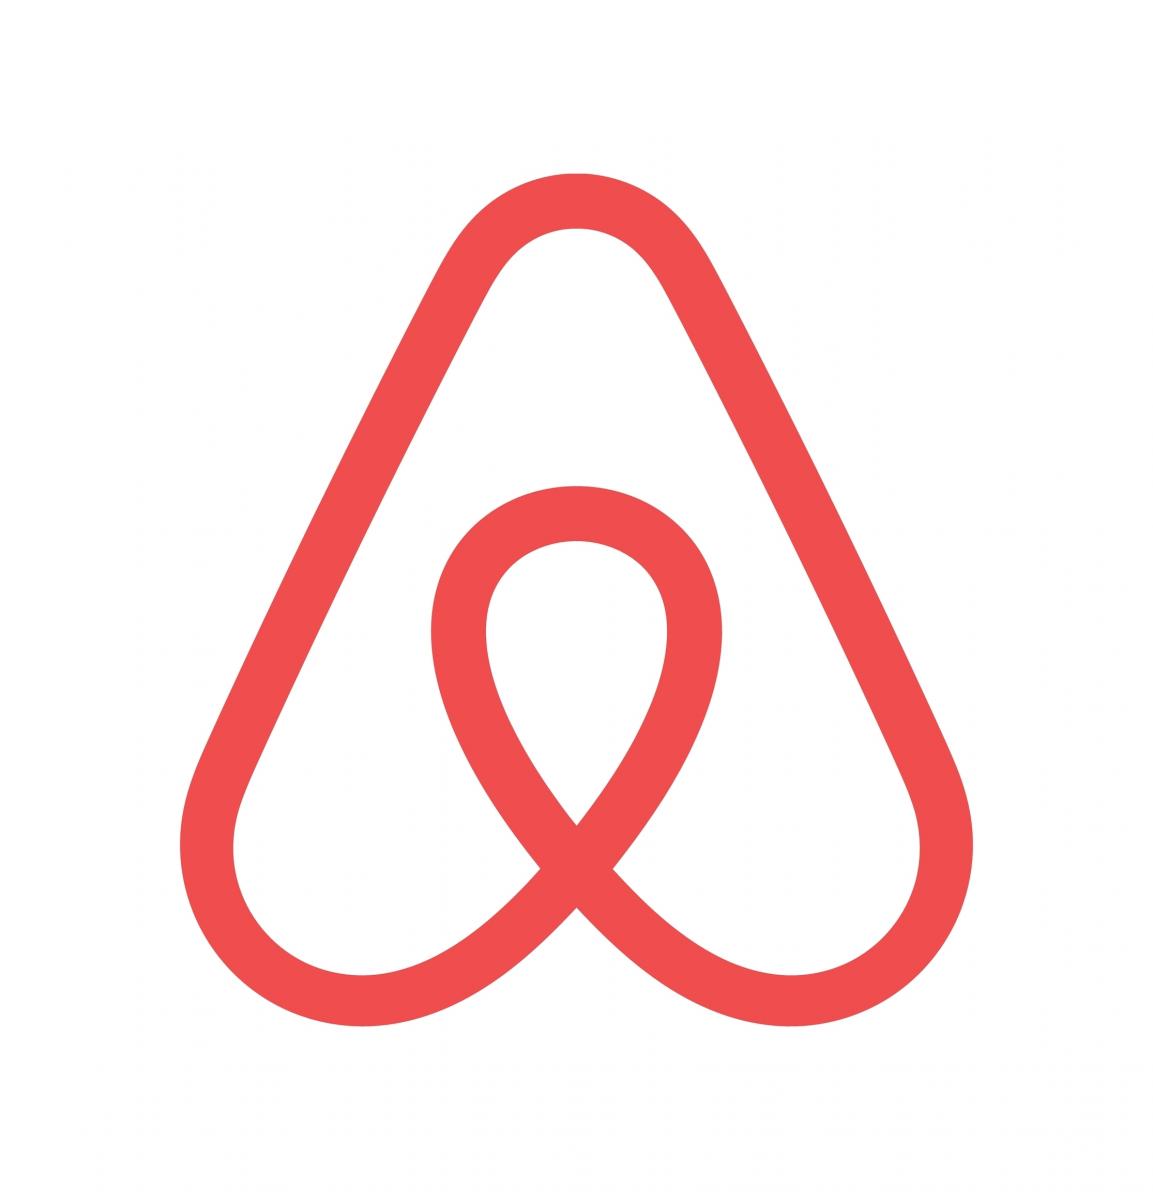 Airbnb ‘problem’ may be smaller than critics claim 